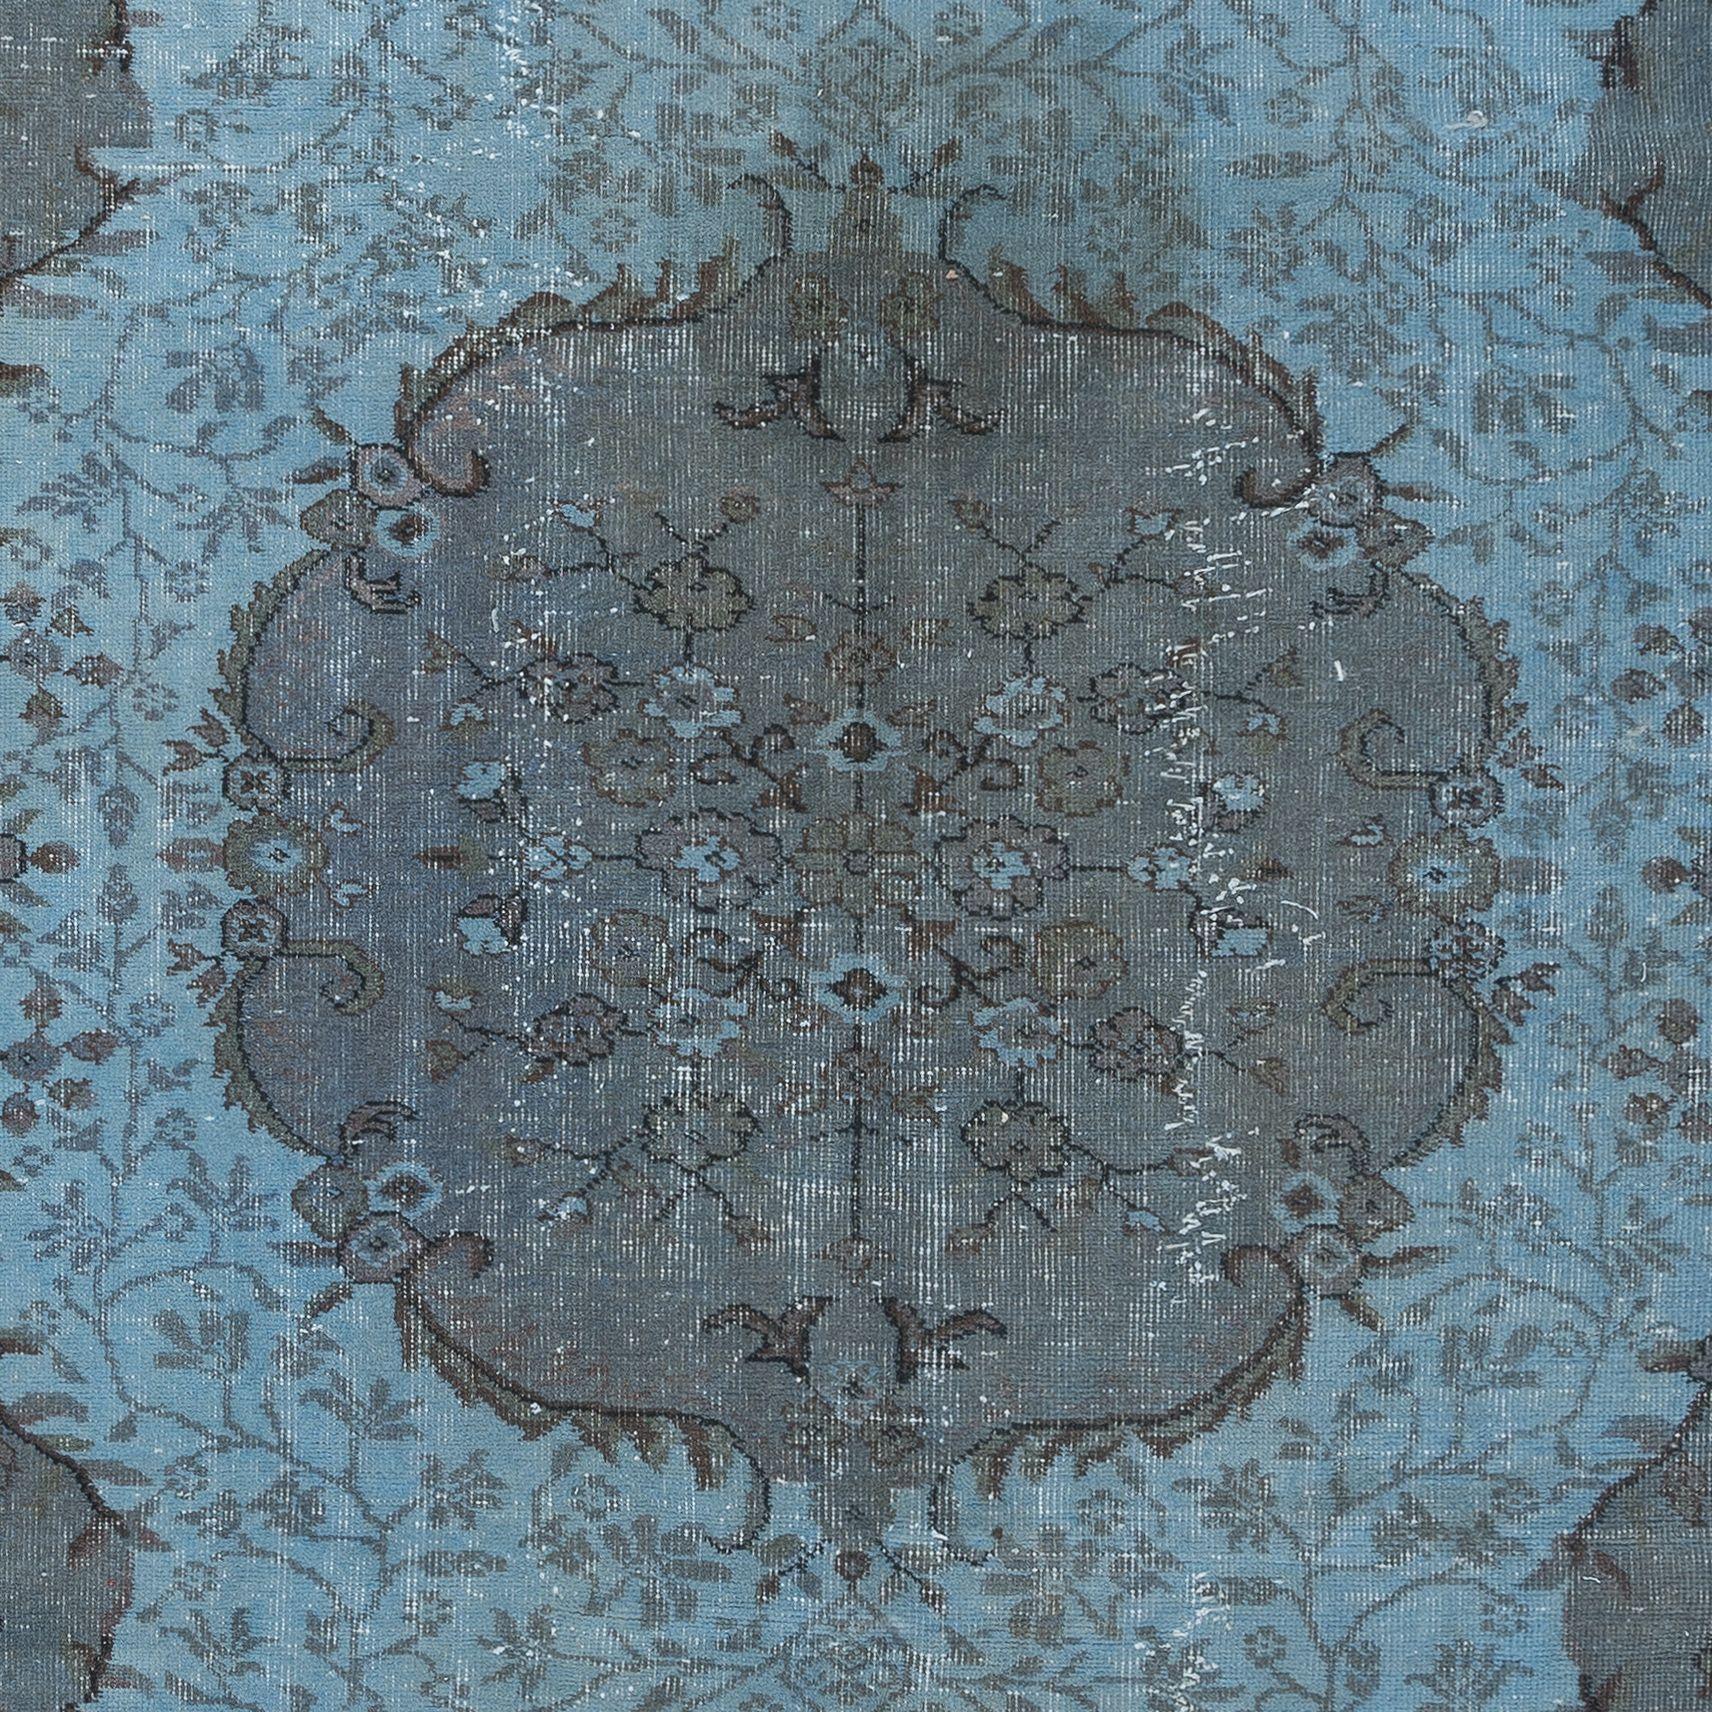 Hand-Woven 5.5x8.5 Ft Sky Blue Modern Area Rug, Handwoven & Handknotted in Isparta, Turkey For Sale